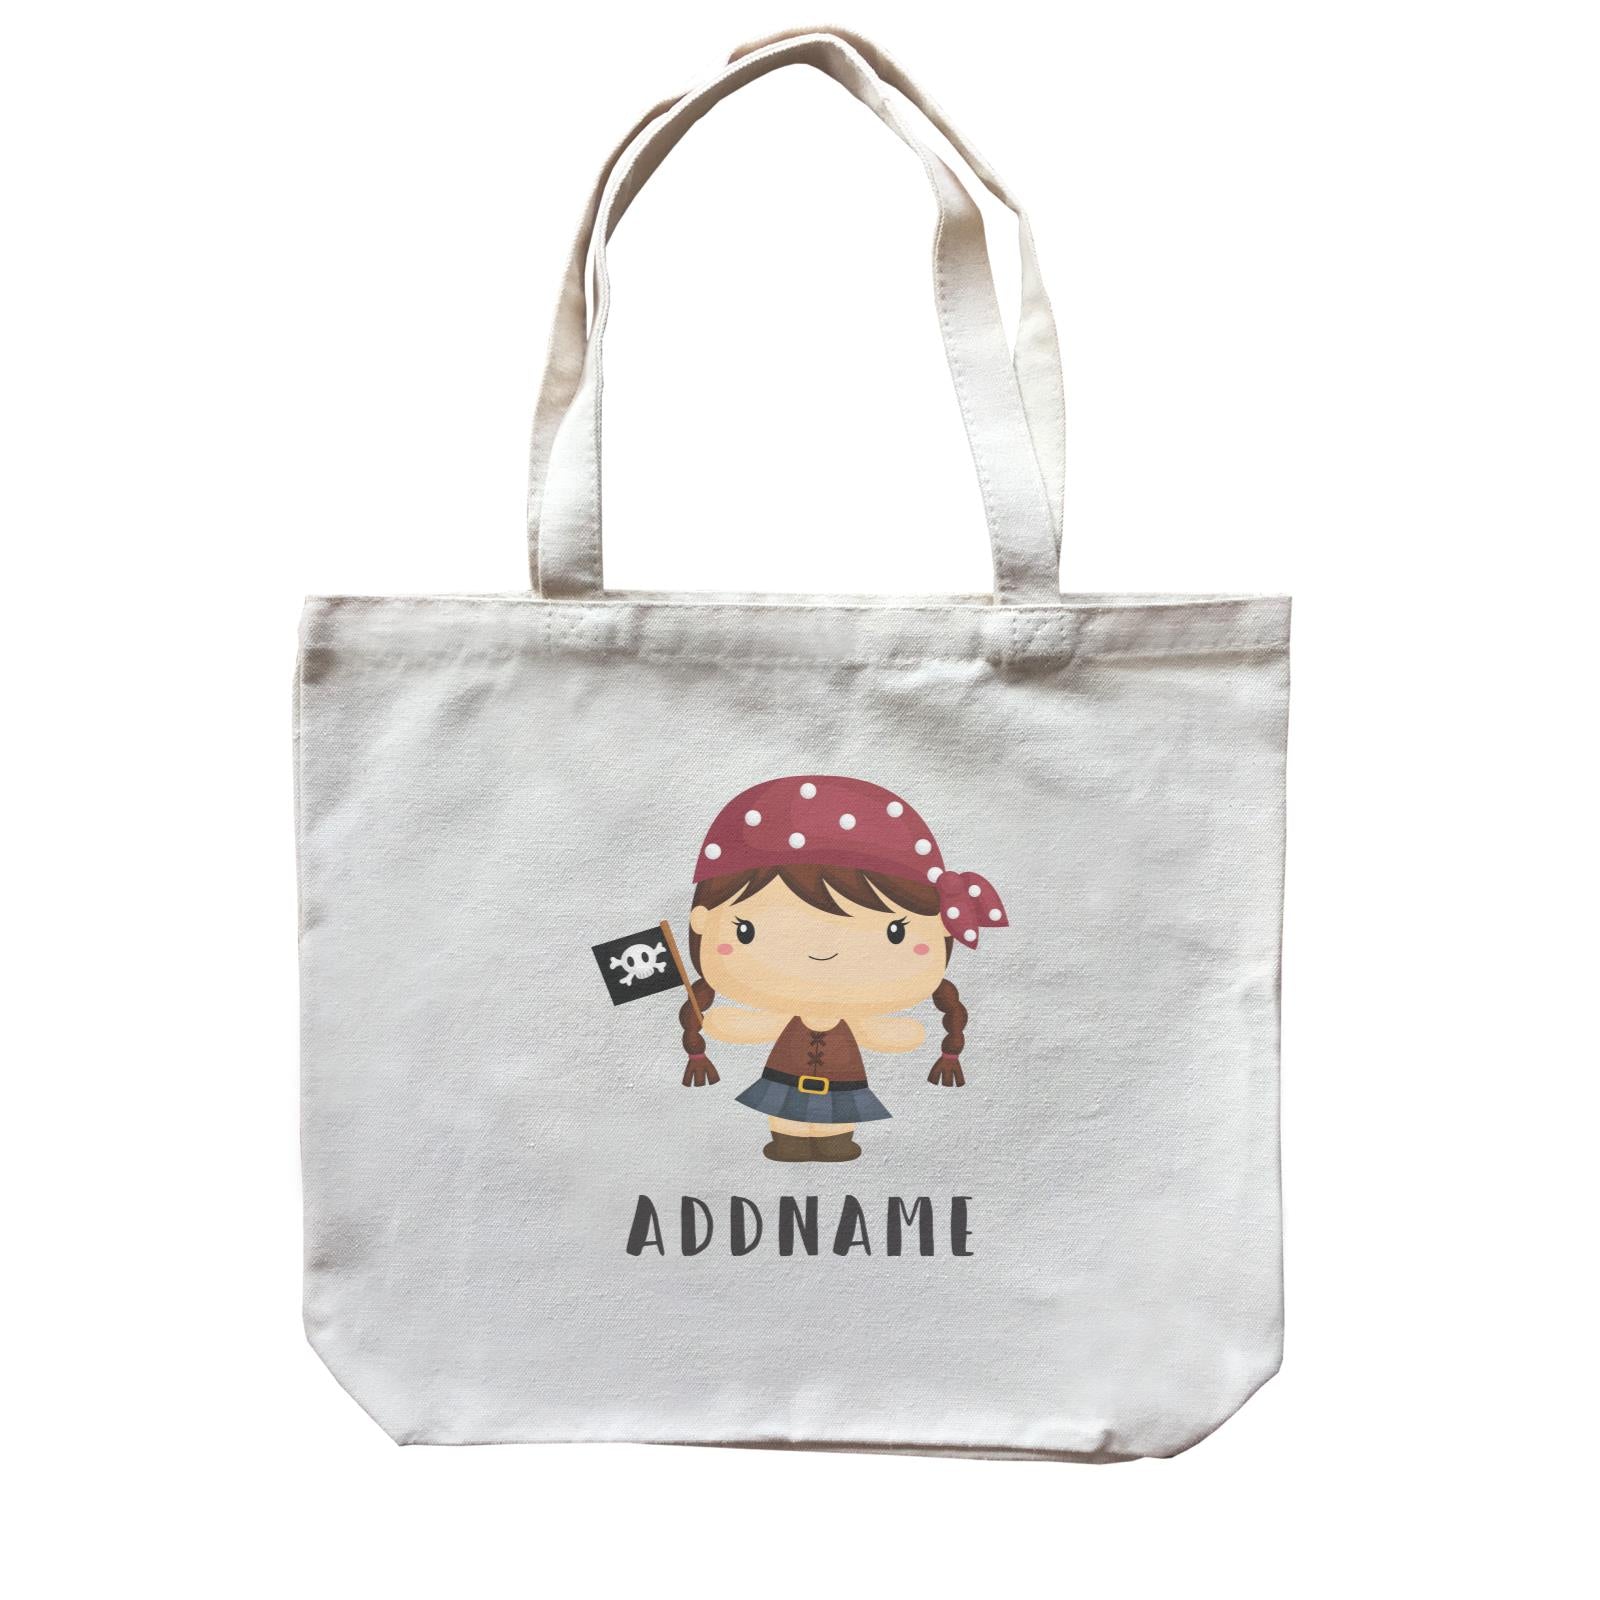 Birthday Pirate Girl Crew Holding Pirate Flag Addname Canvas Bag